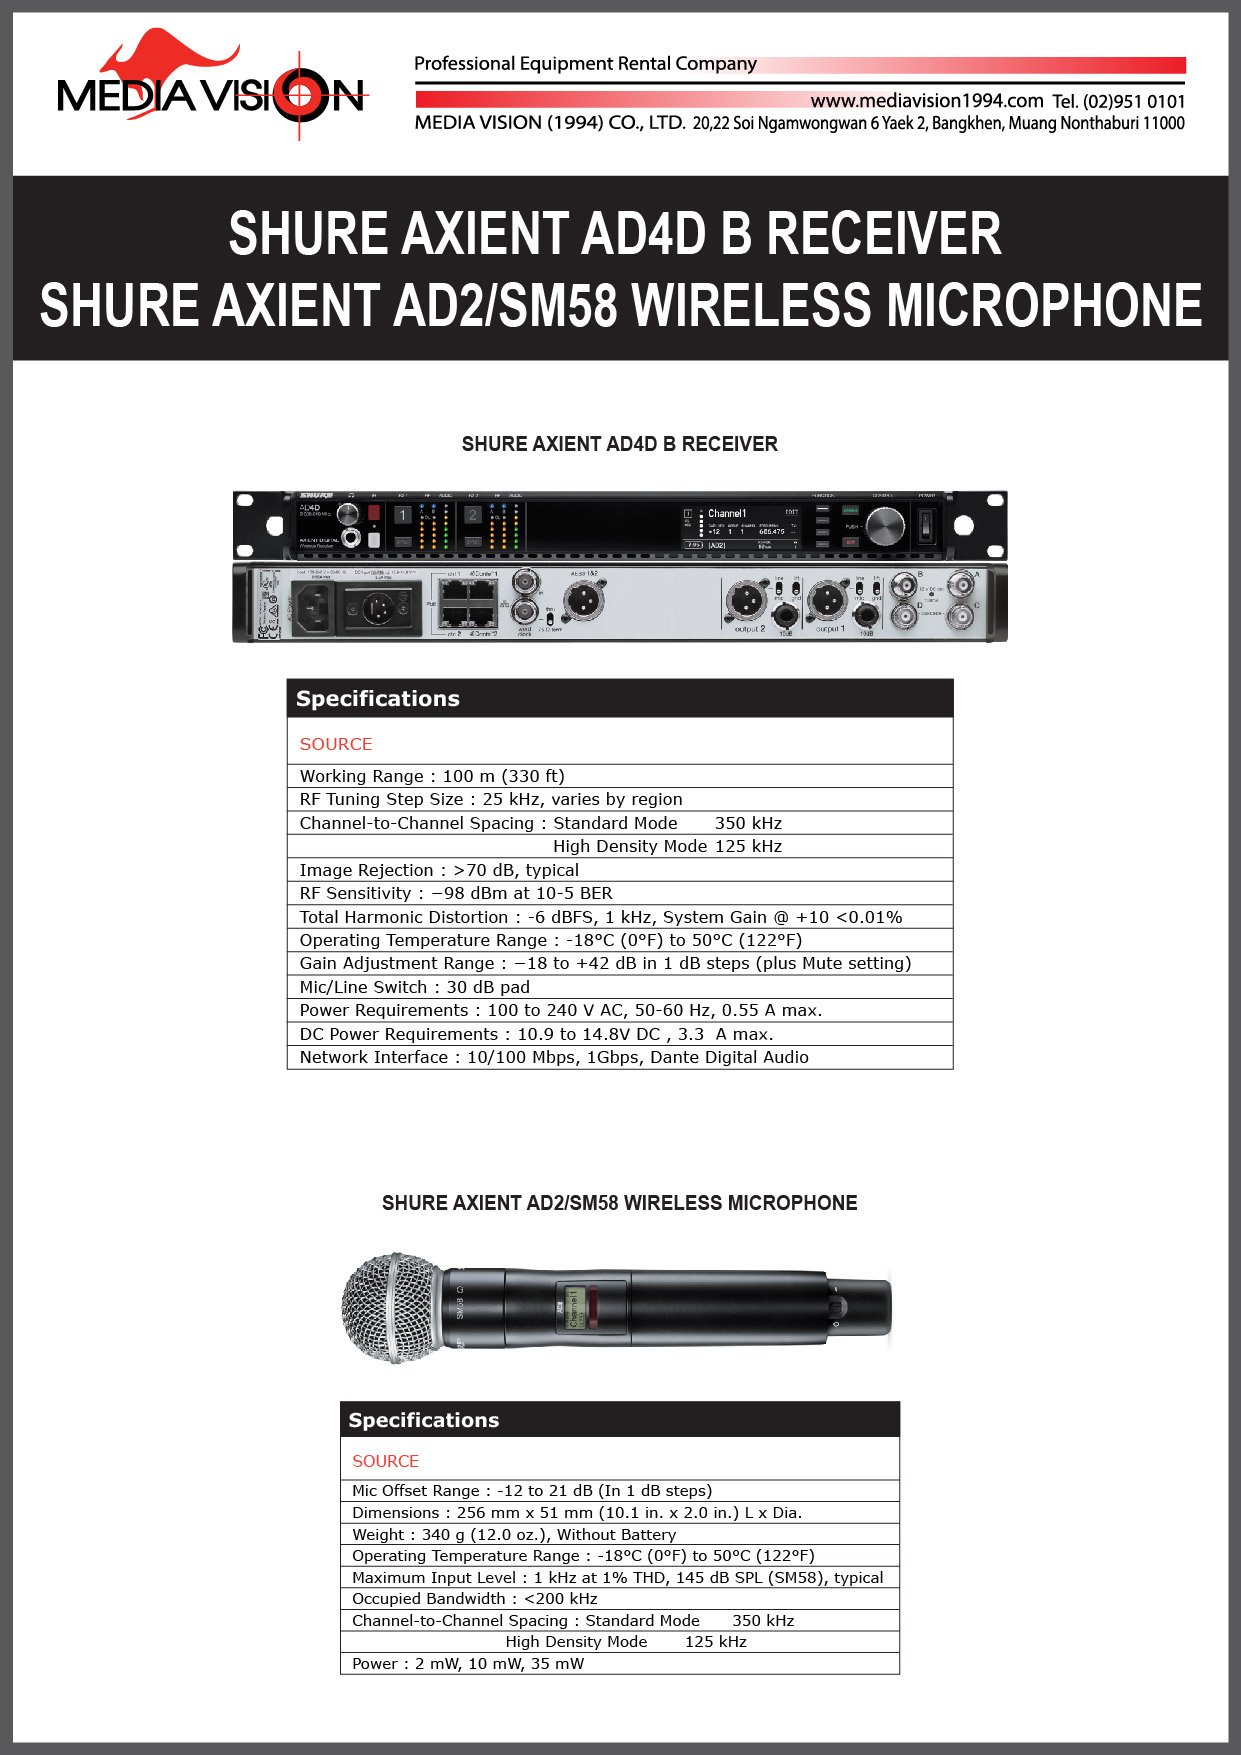 SHURE AXIENT  AD4D B RECEIVER , SHURE AXIENT AD2/SM58 WIRELESS MICROPHONE